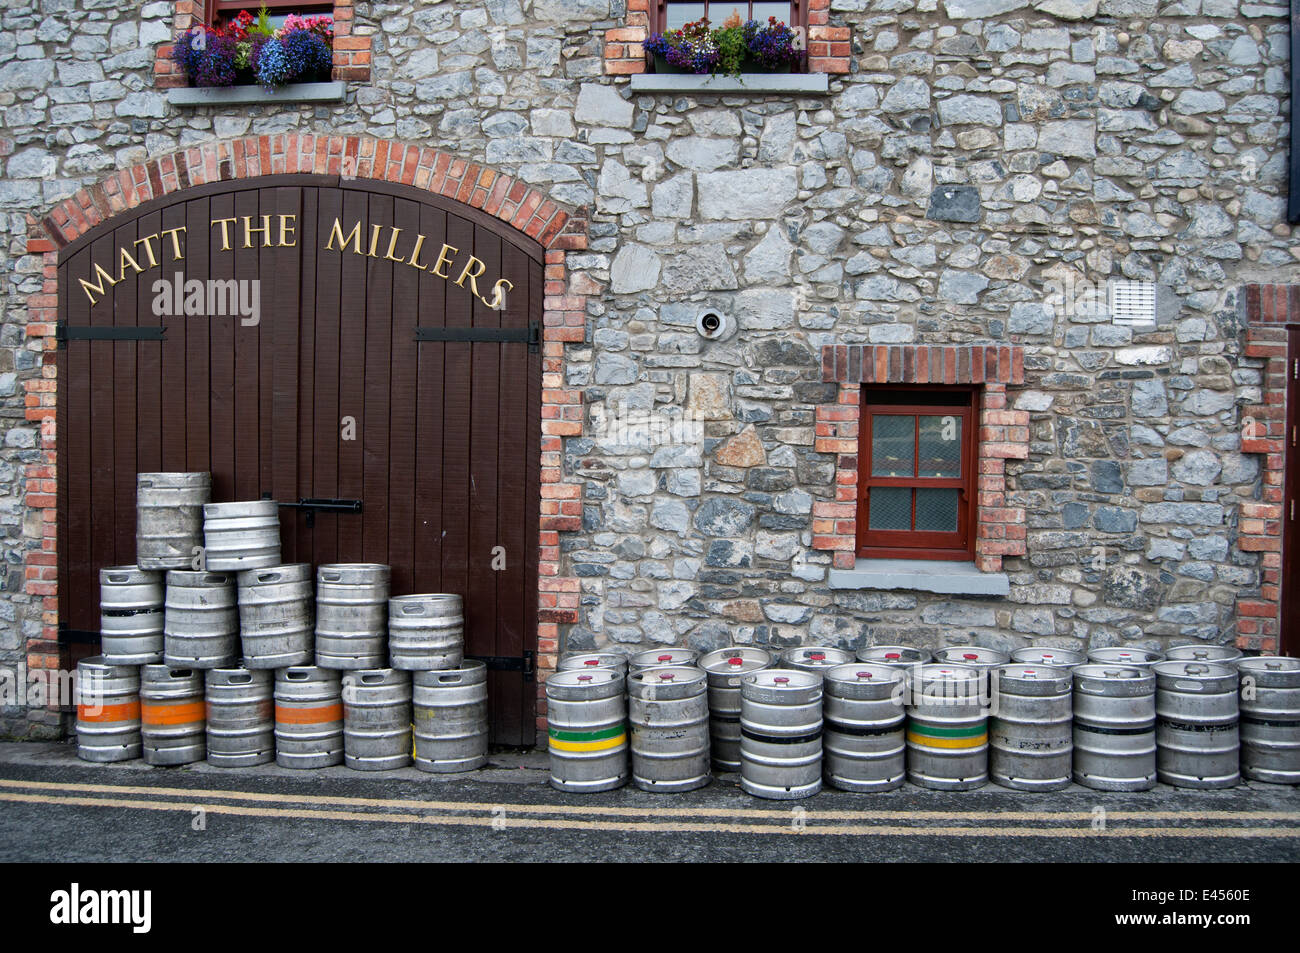 KILKENNY, IRELAND - AUGUST 6, 2012 : lot of kegs in front of the pub Matt the Millers on August 6, 2012 in Kilkenny, Ireland. Stock Photo